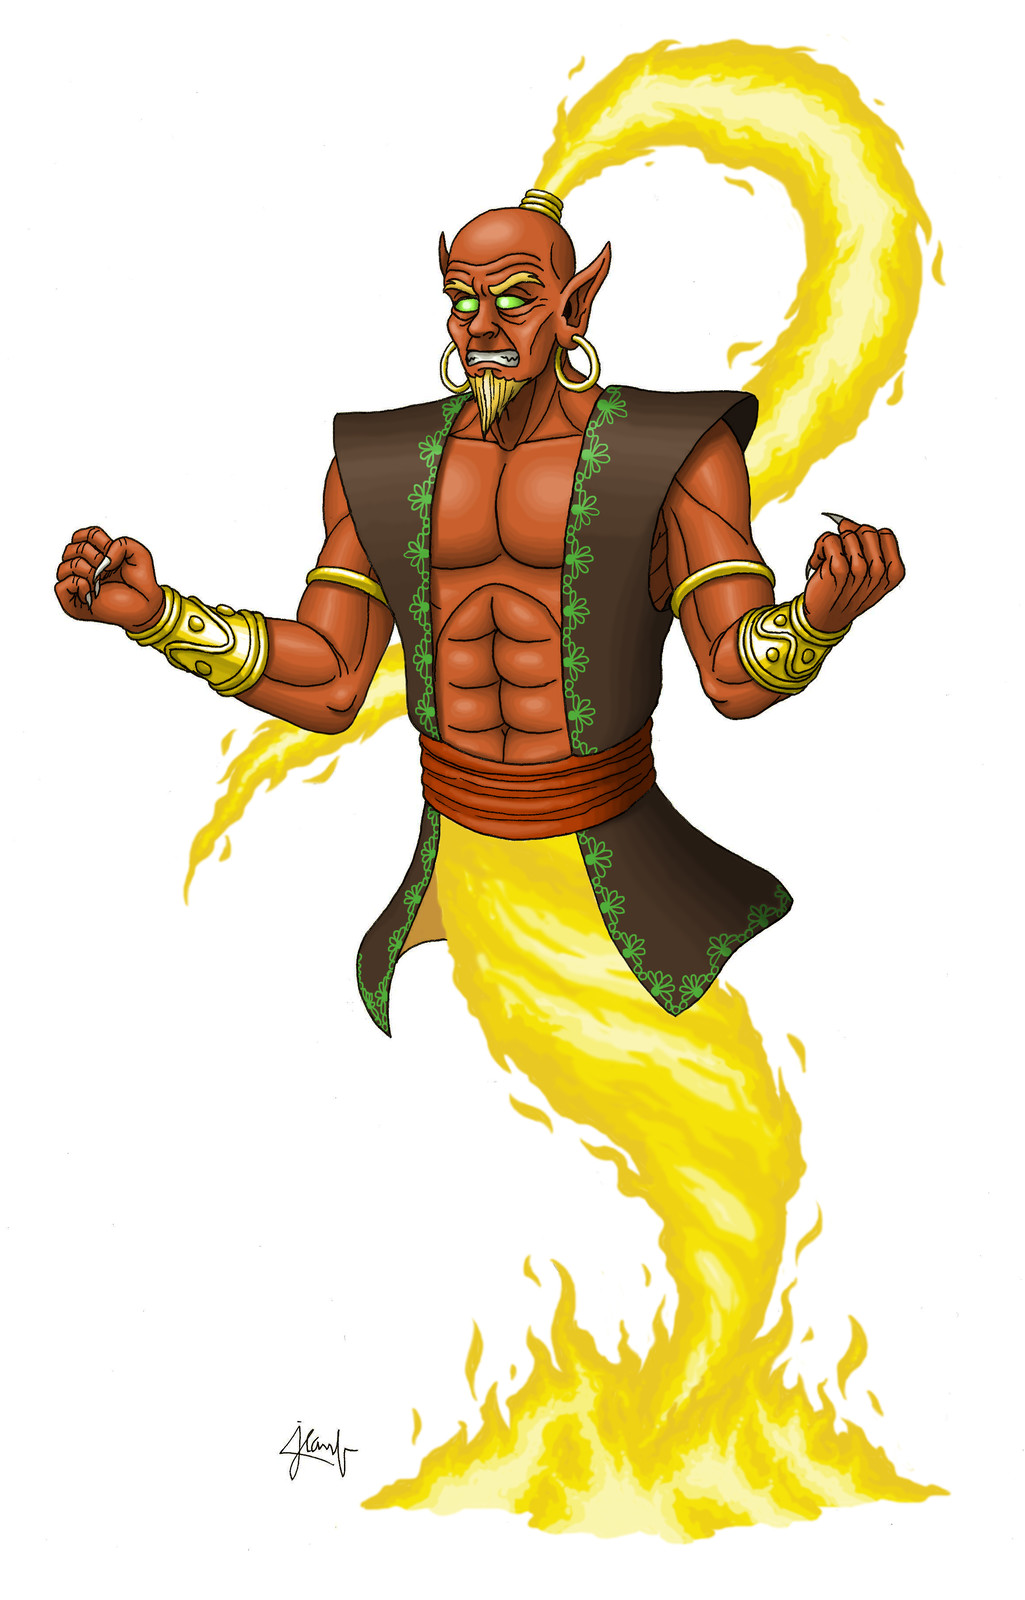 Here's my take on an Efreet (or Ifrit), the most powerful category of ...